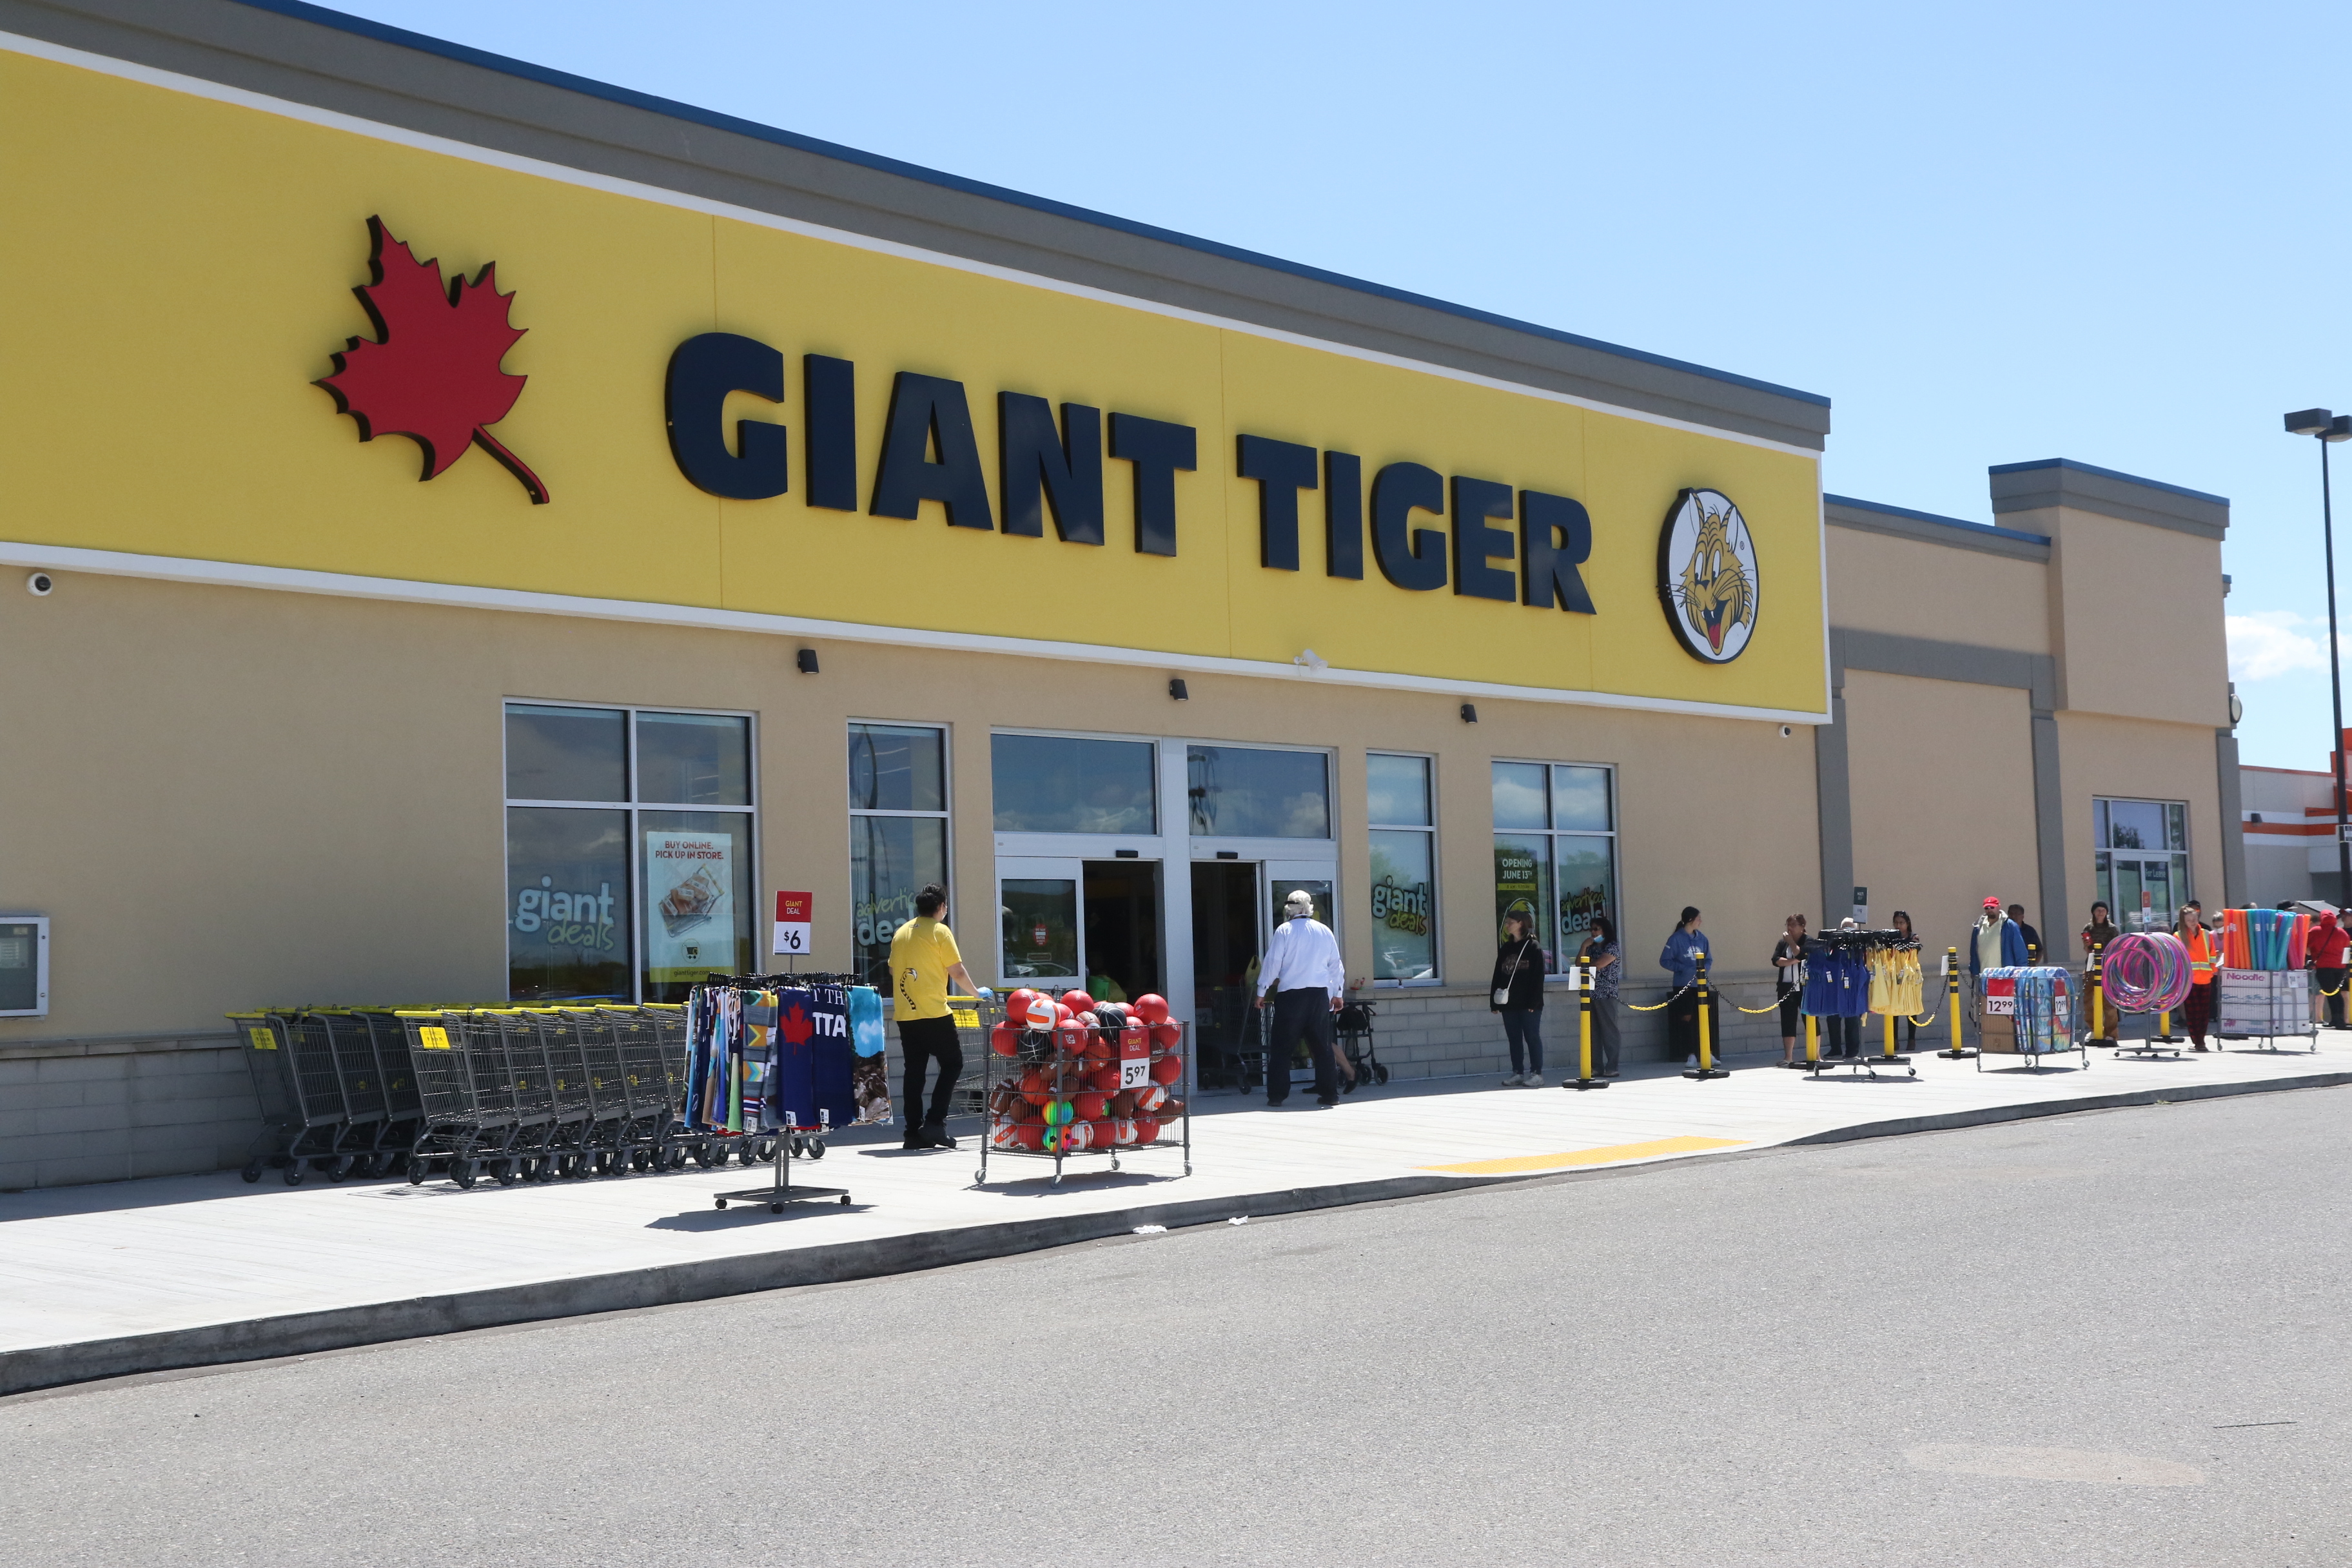 https://www.vmcdn.ca/f/files/tbnewswatch/images/local-news/2020/june/giant-tiger/giant-tiger-thunder-bay.JPG